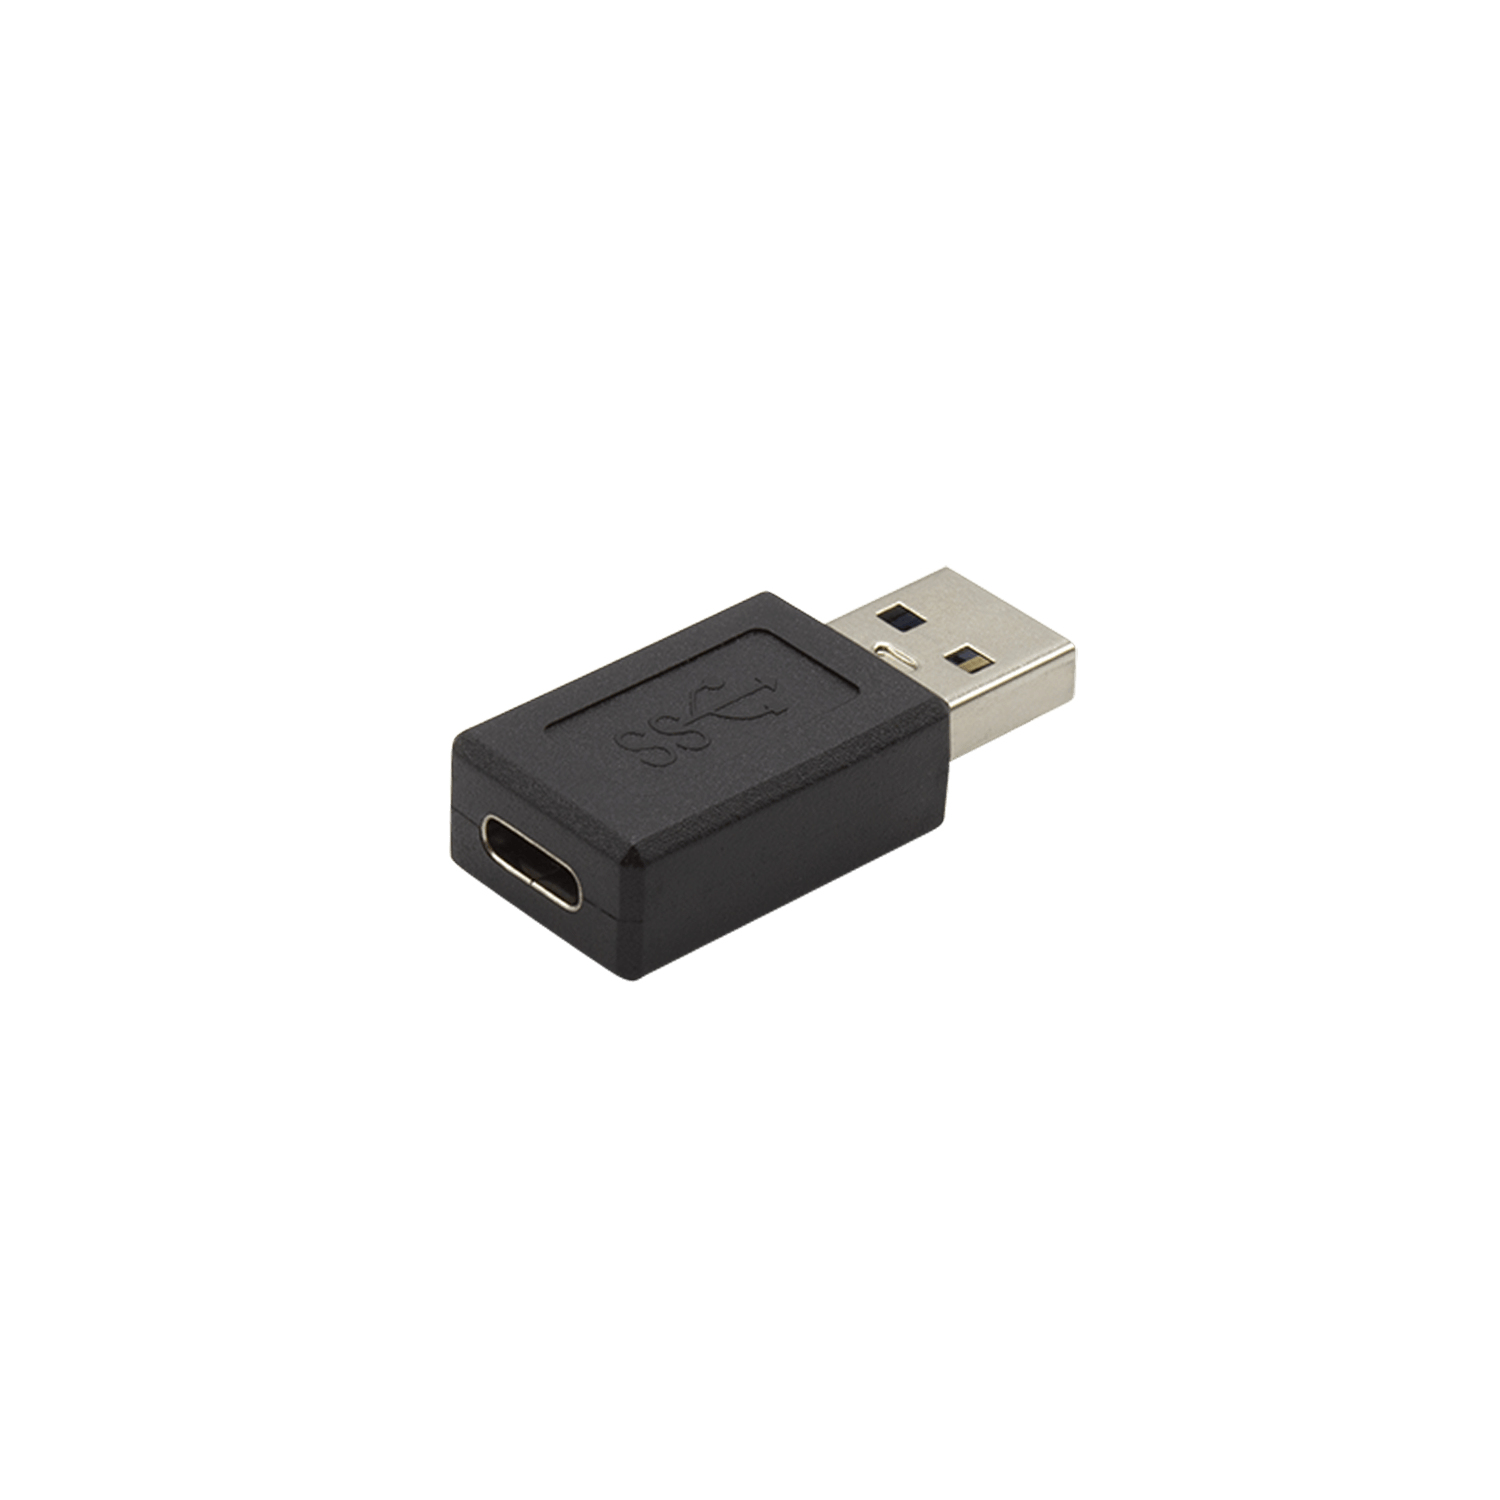 Photos - Cable (video, audio, USB) i-Tec USB 3.0/3.1 to USB-C Adapter  C31TYPEA (10 Gbps)